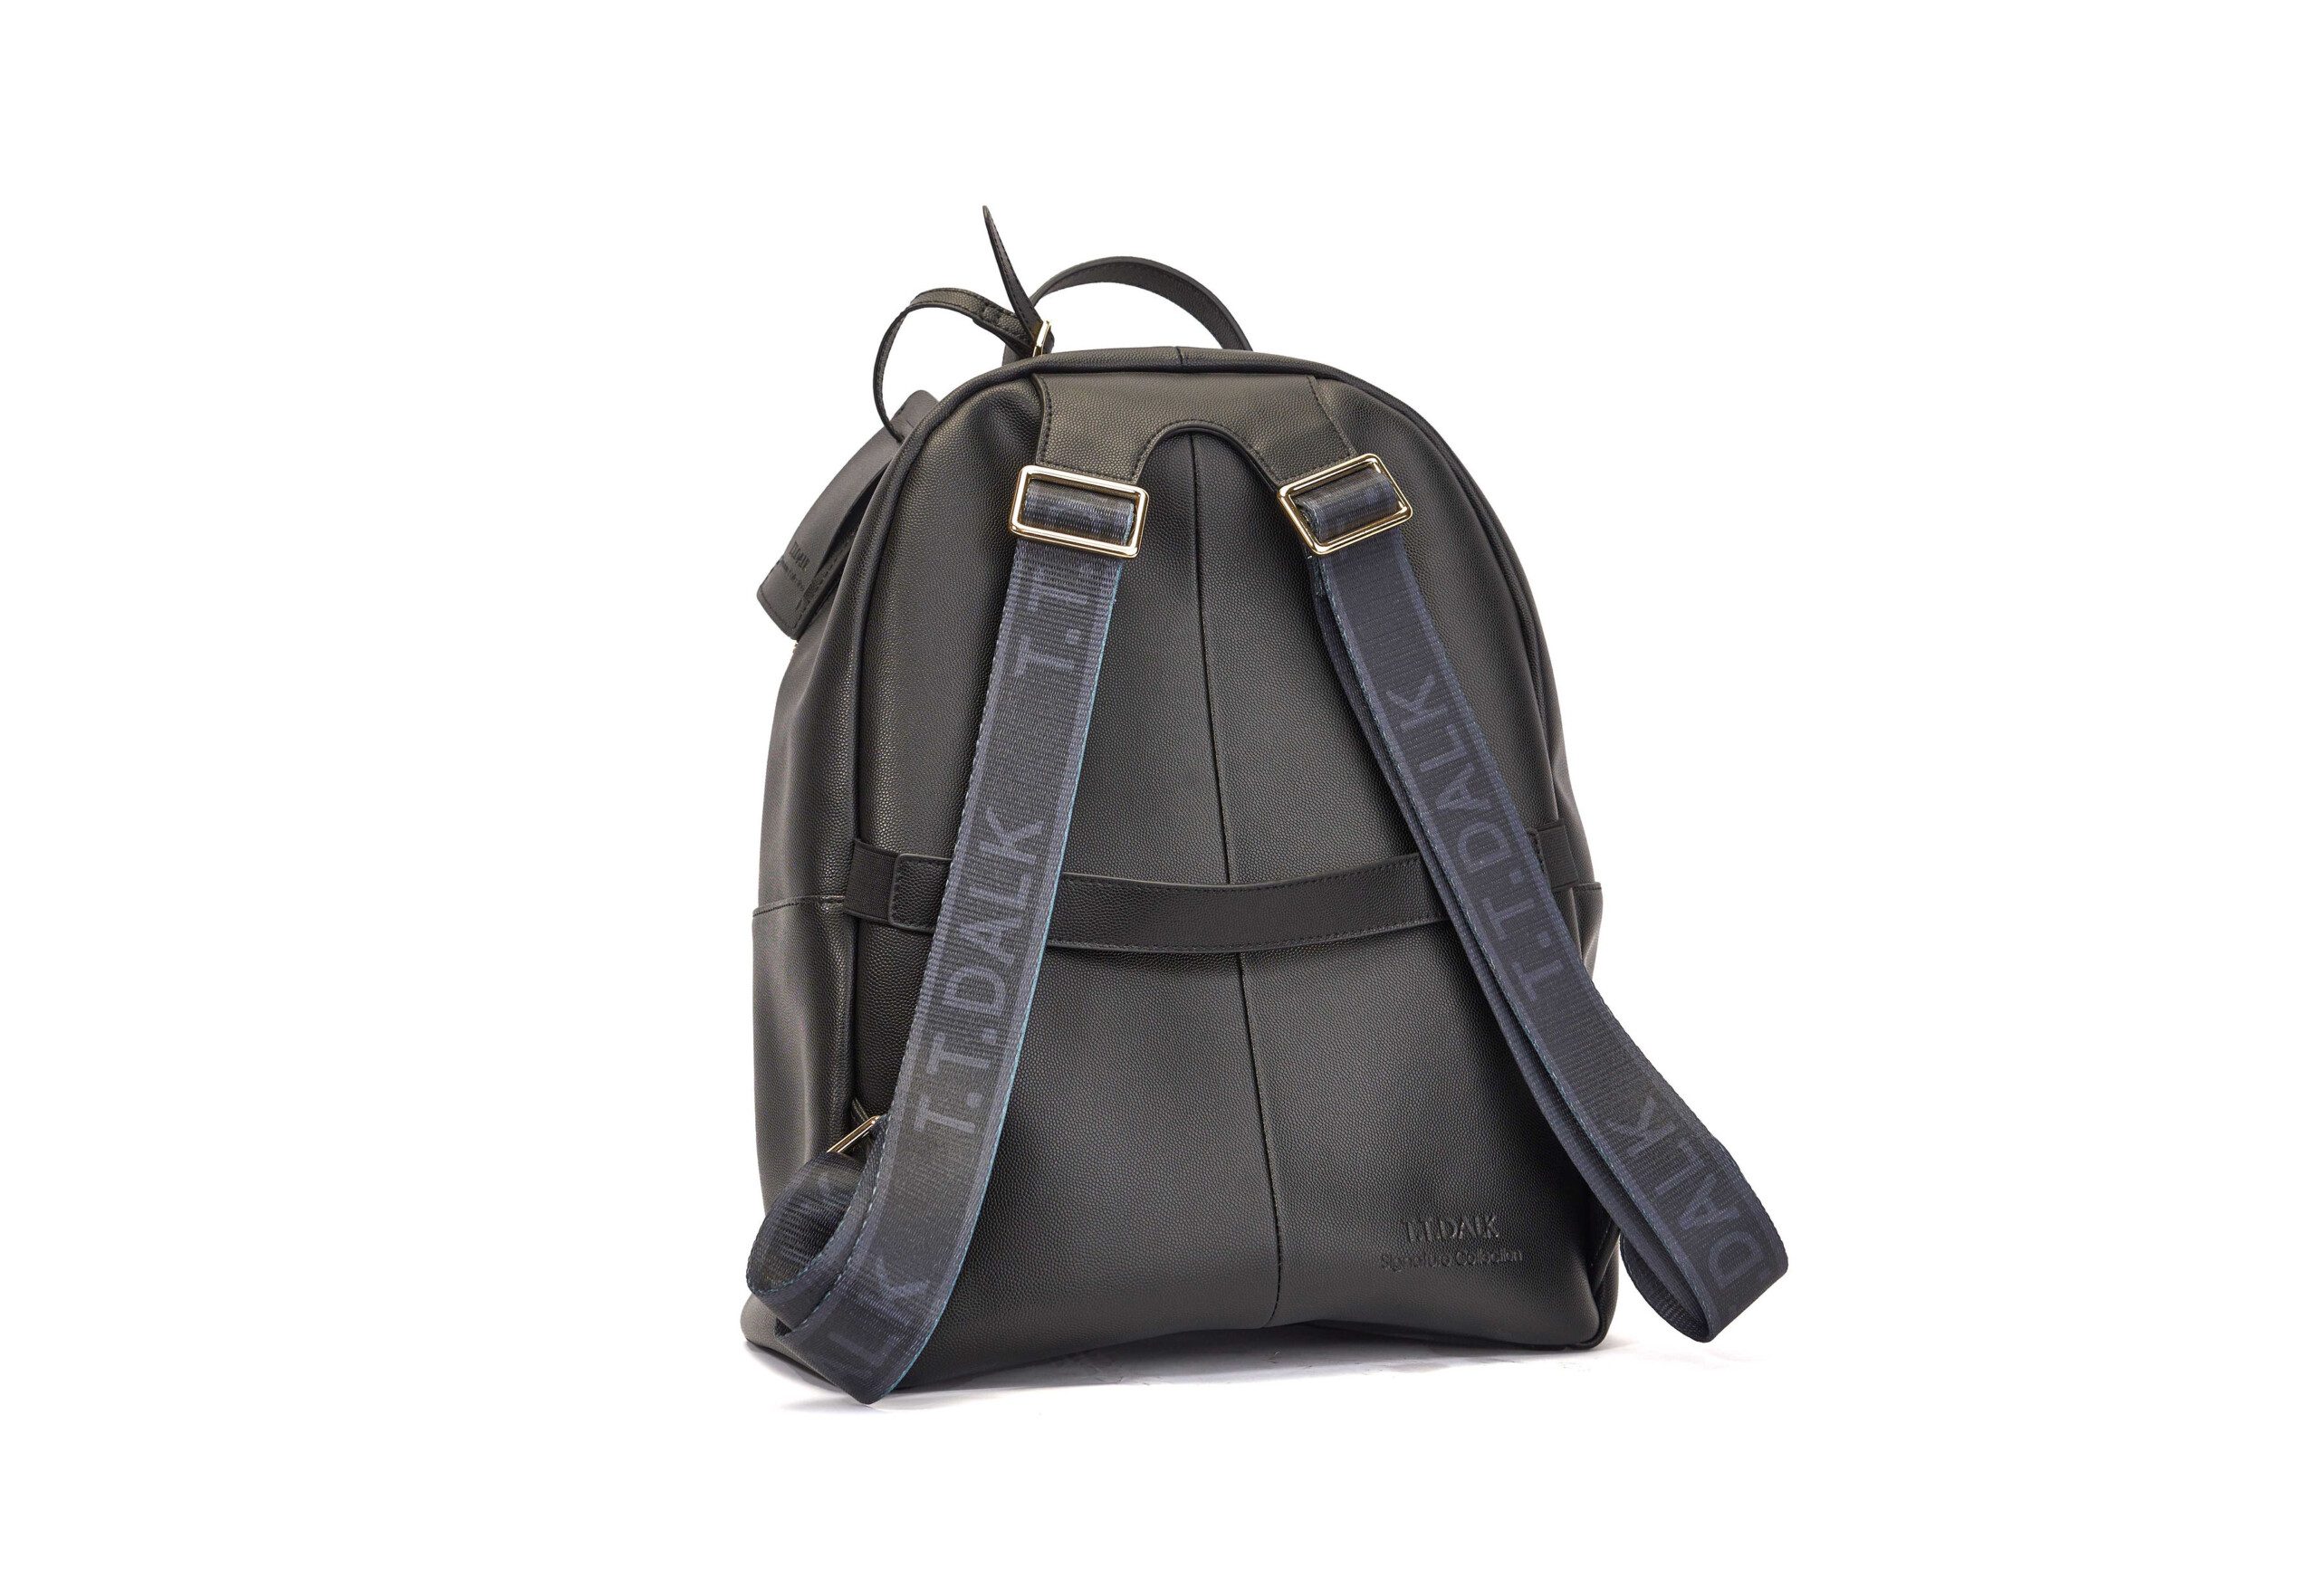 Black backpack with silhouette crest - T.T.Dalk Nigeria